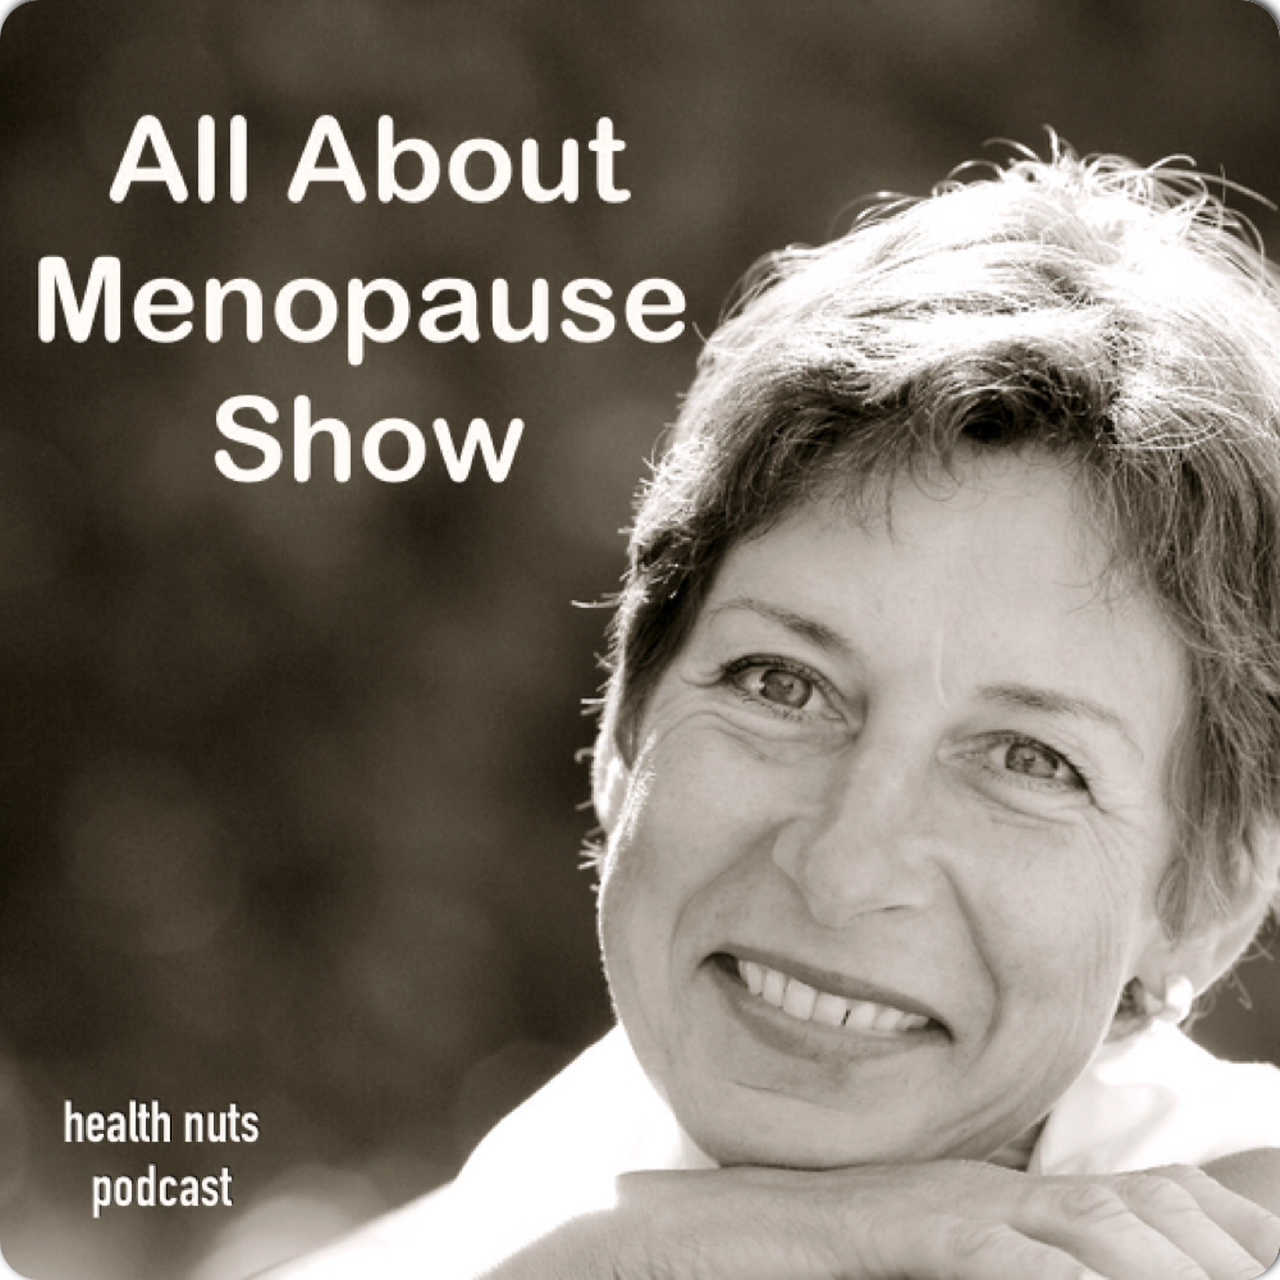 All About Menopause with Dr. Lauren Noel